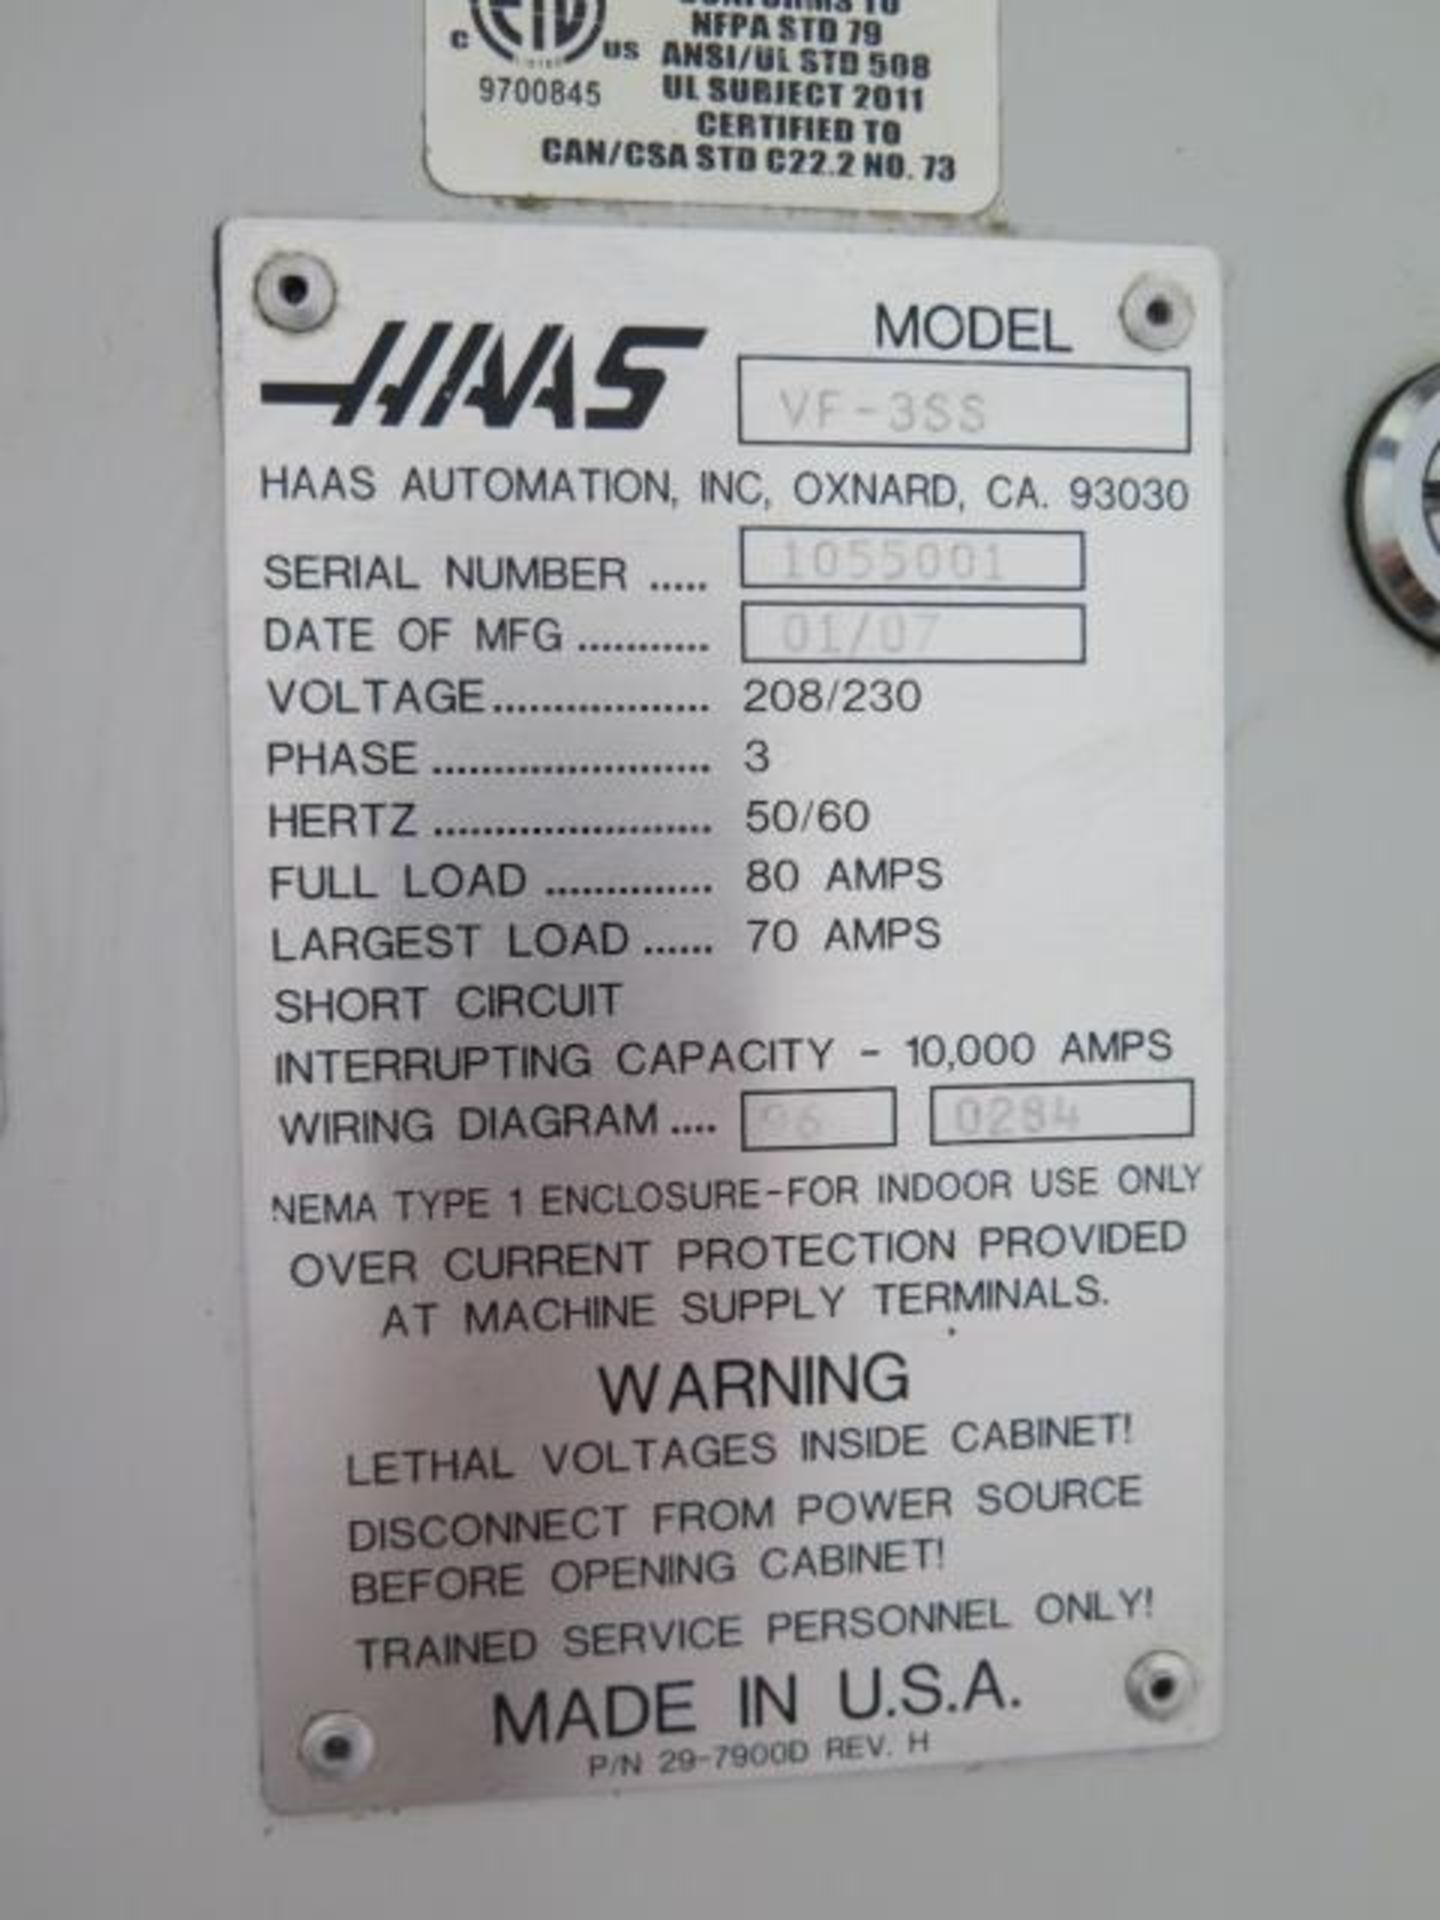 2007 Haas Super VF-3SS CNC VMC s/n 1055001 w/ Haas Controls, Hand Wheel, SOLD AS IS - Image 17 of 17